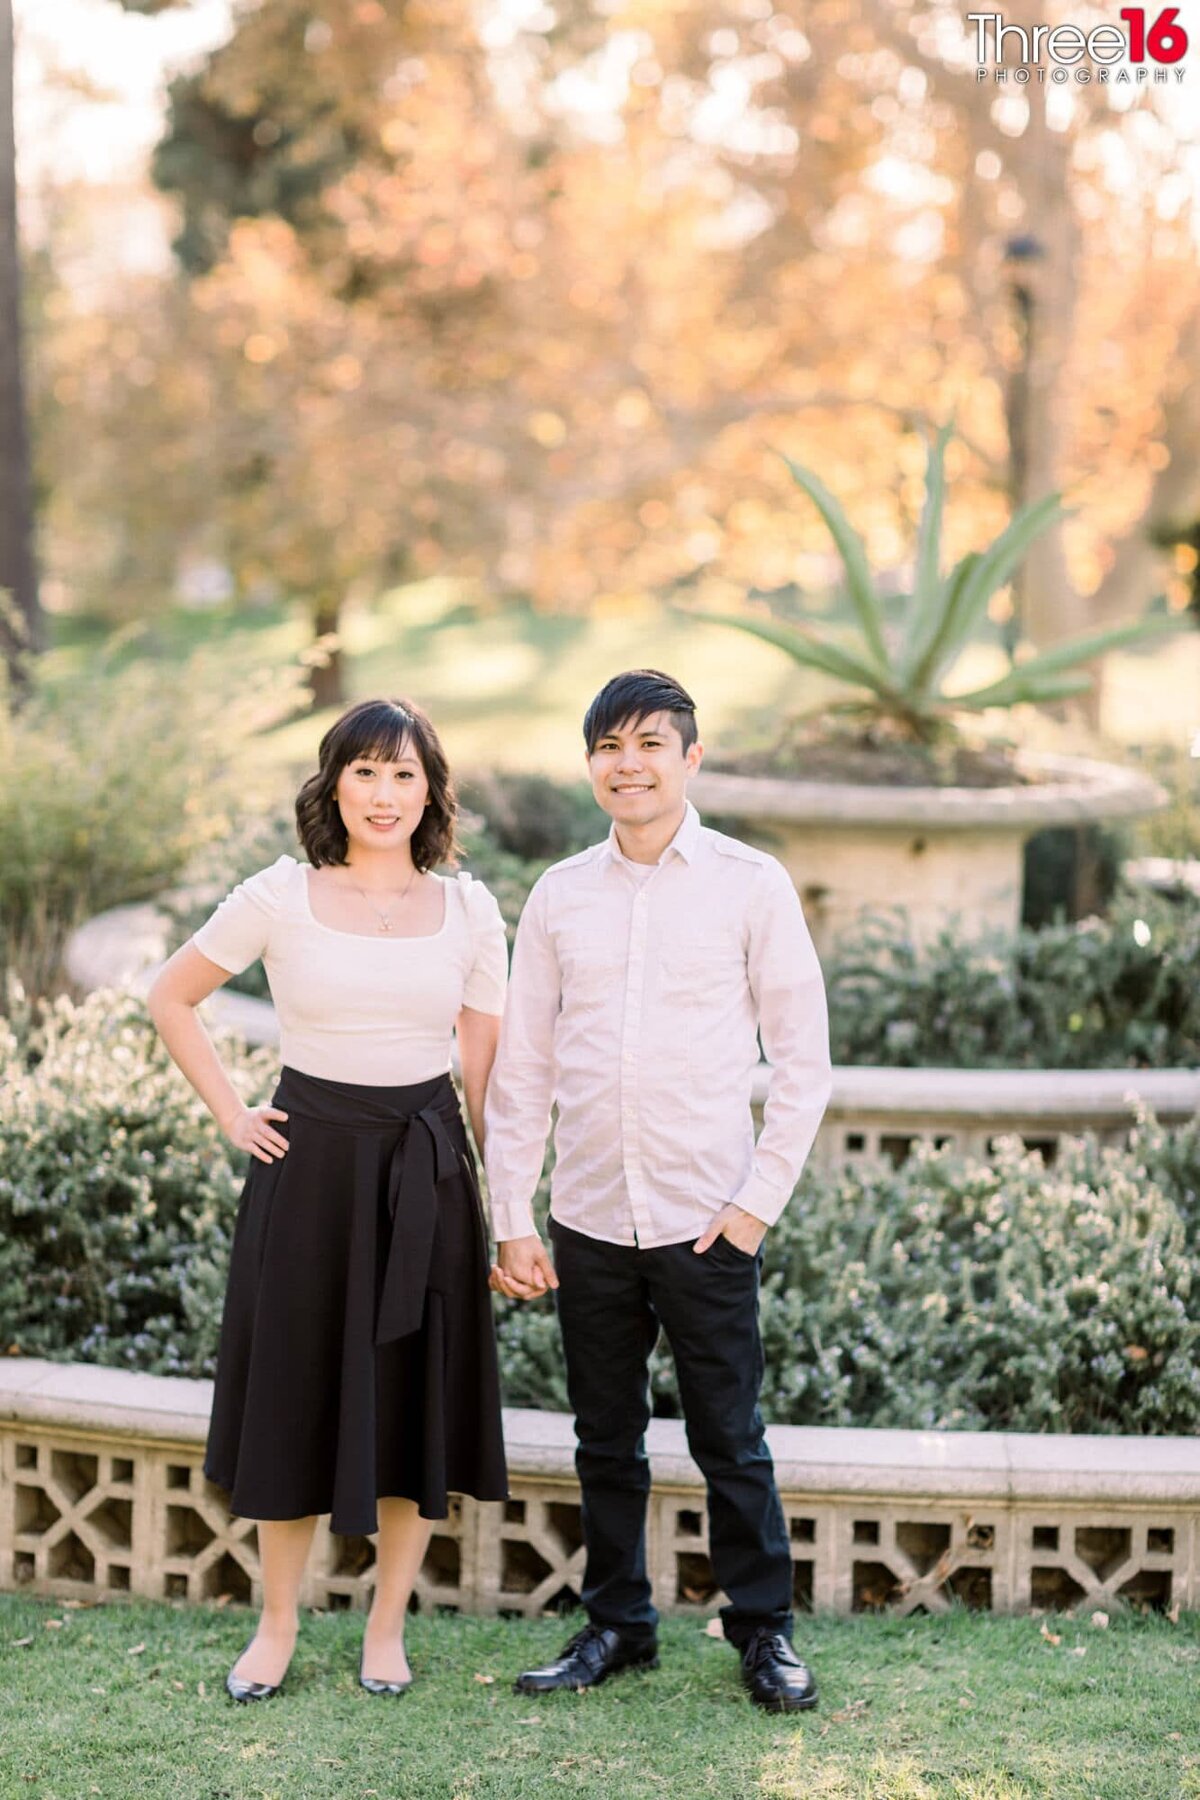 Brand Library Park Engagement Photos-1001